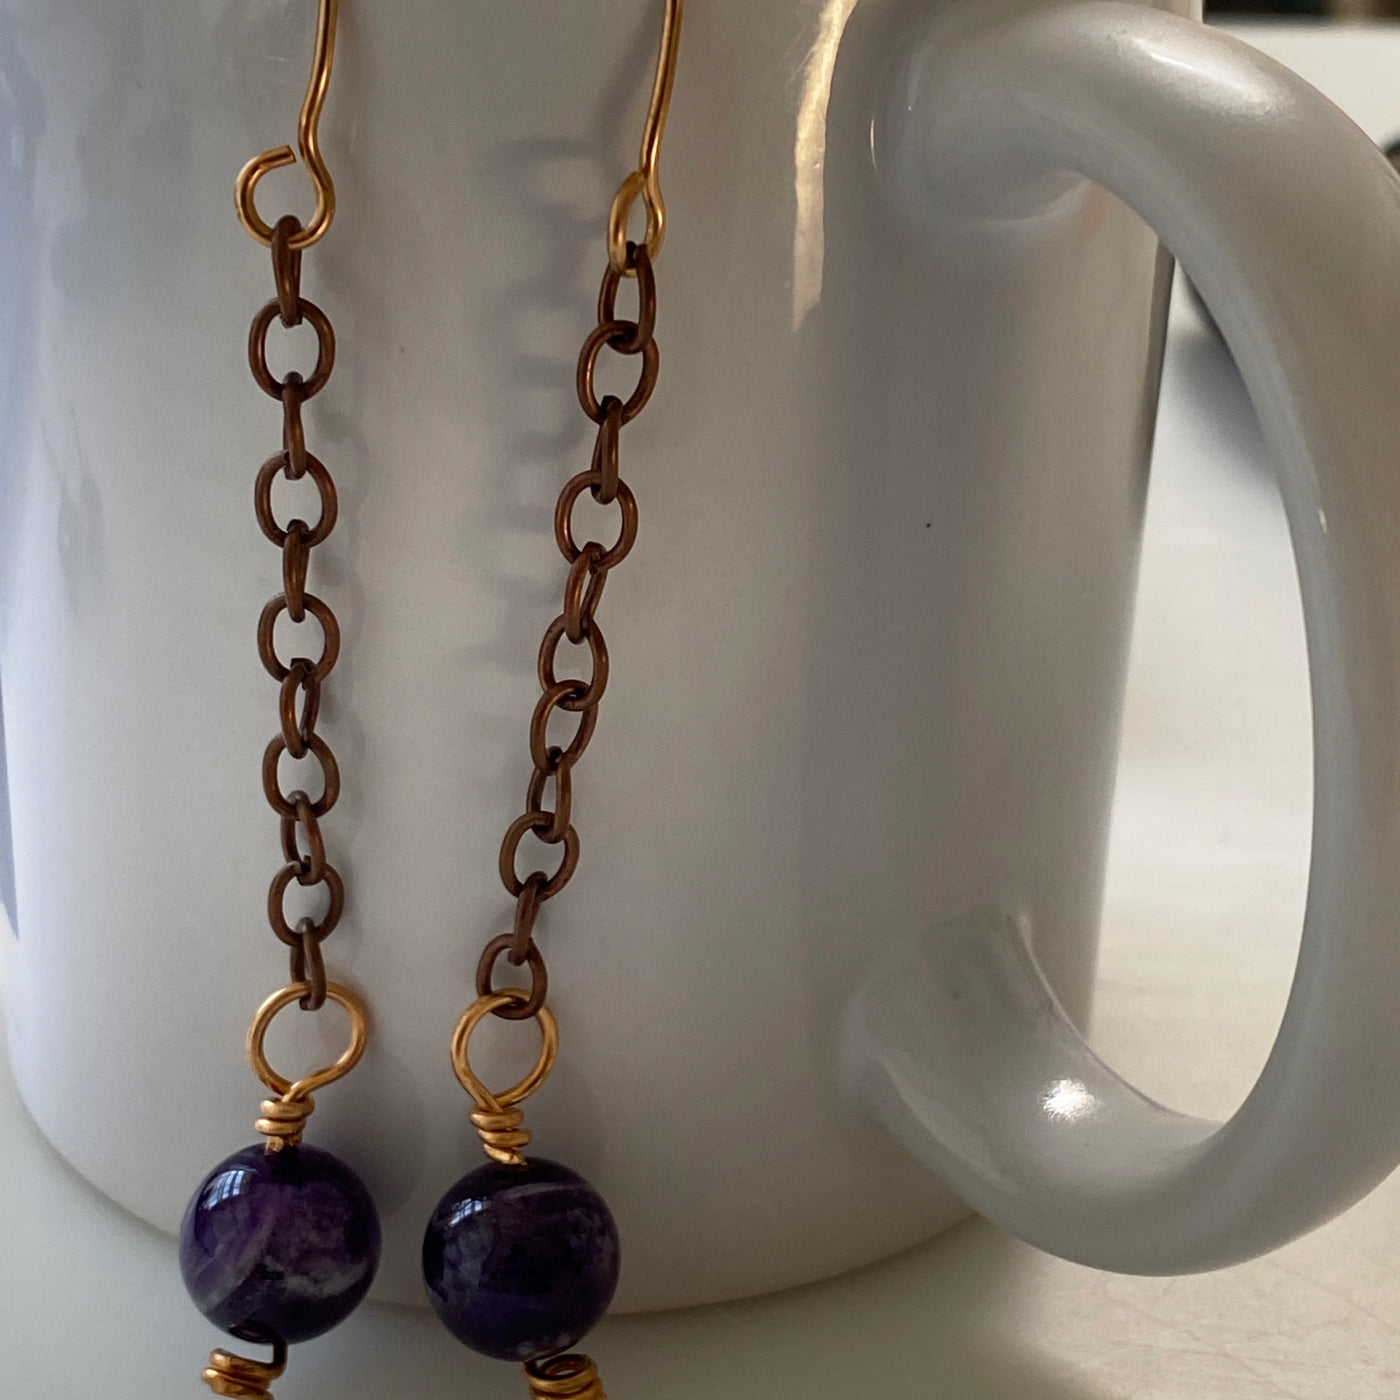 Amethysts and wire. Shake and move earrings.